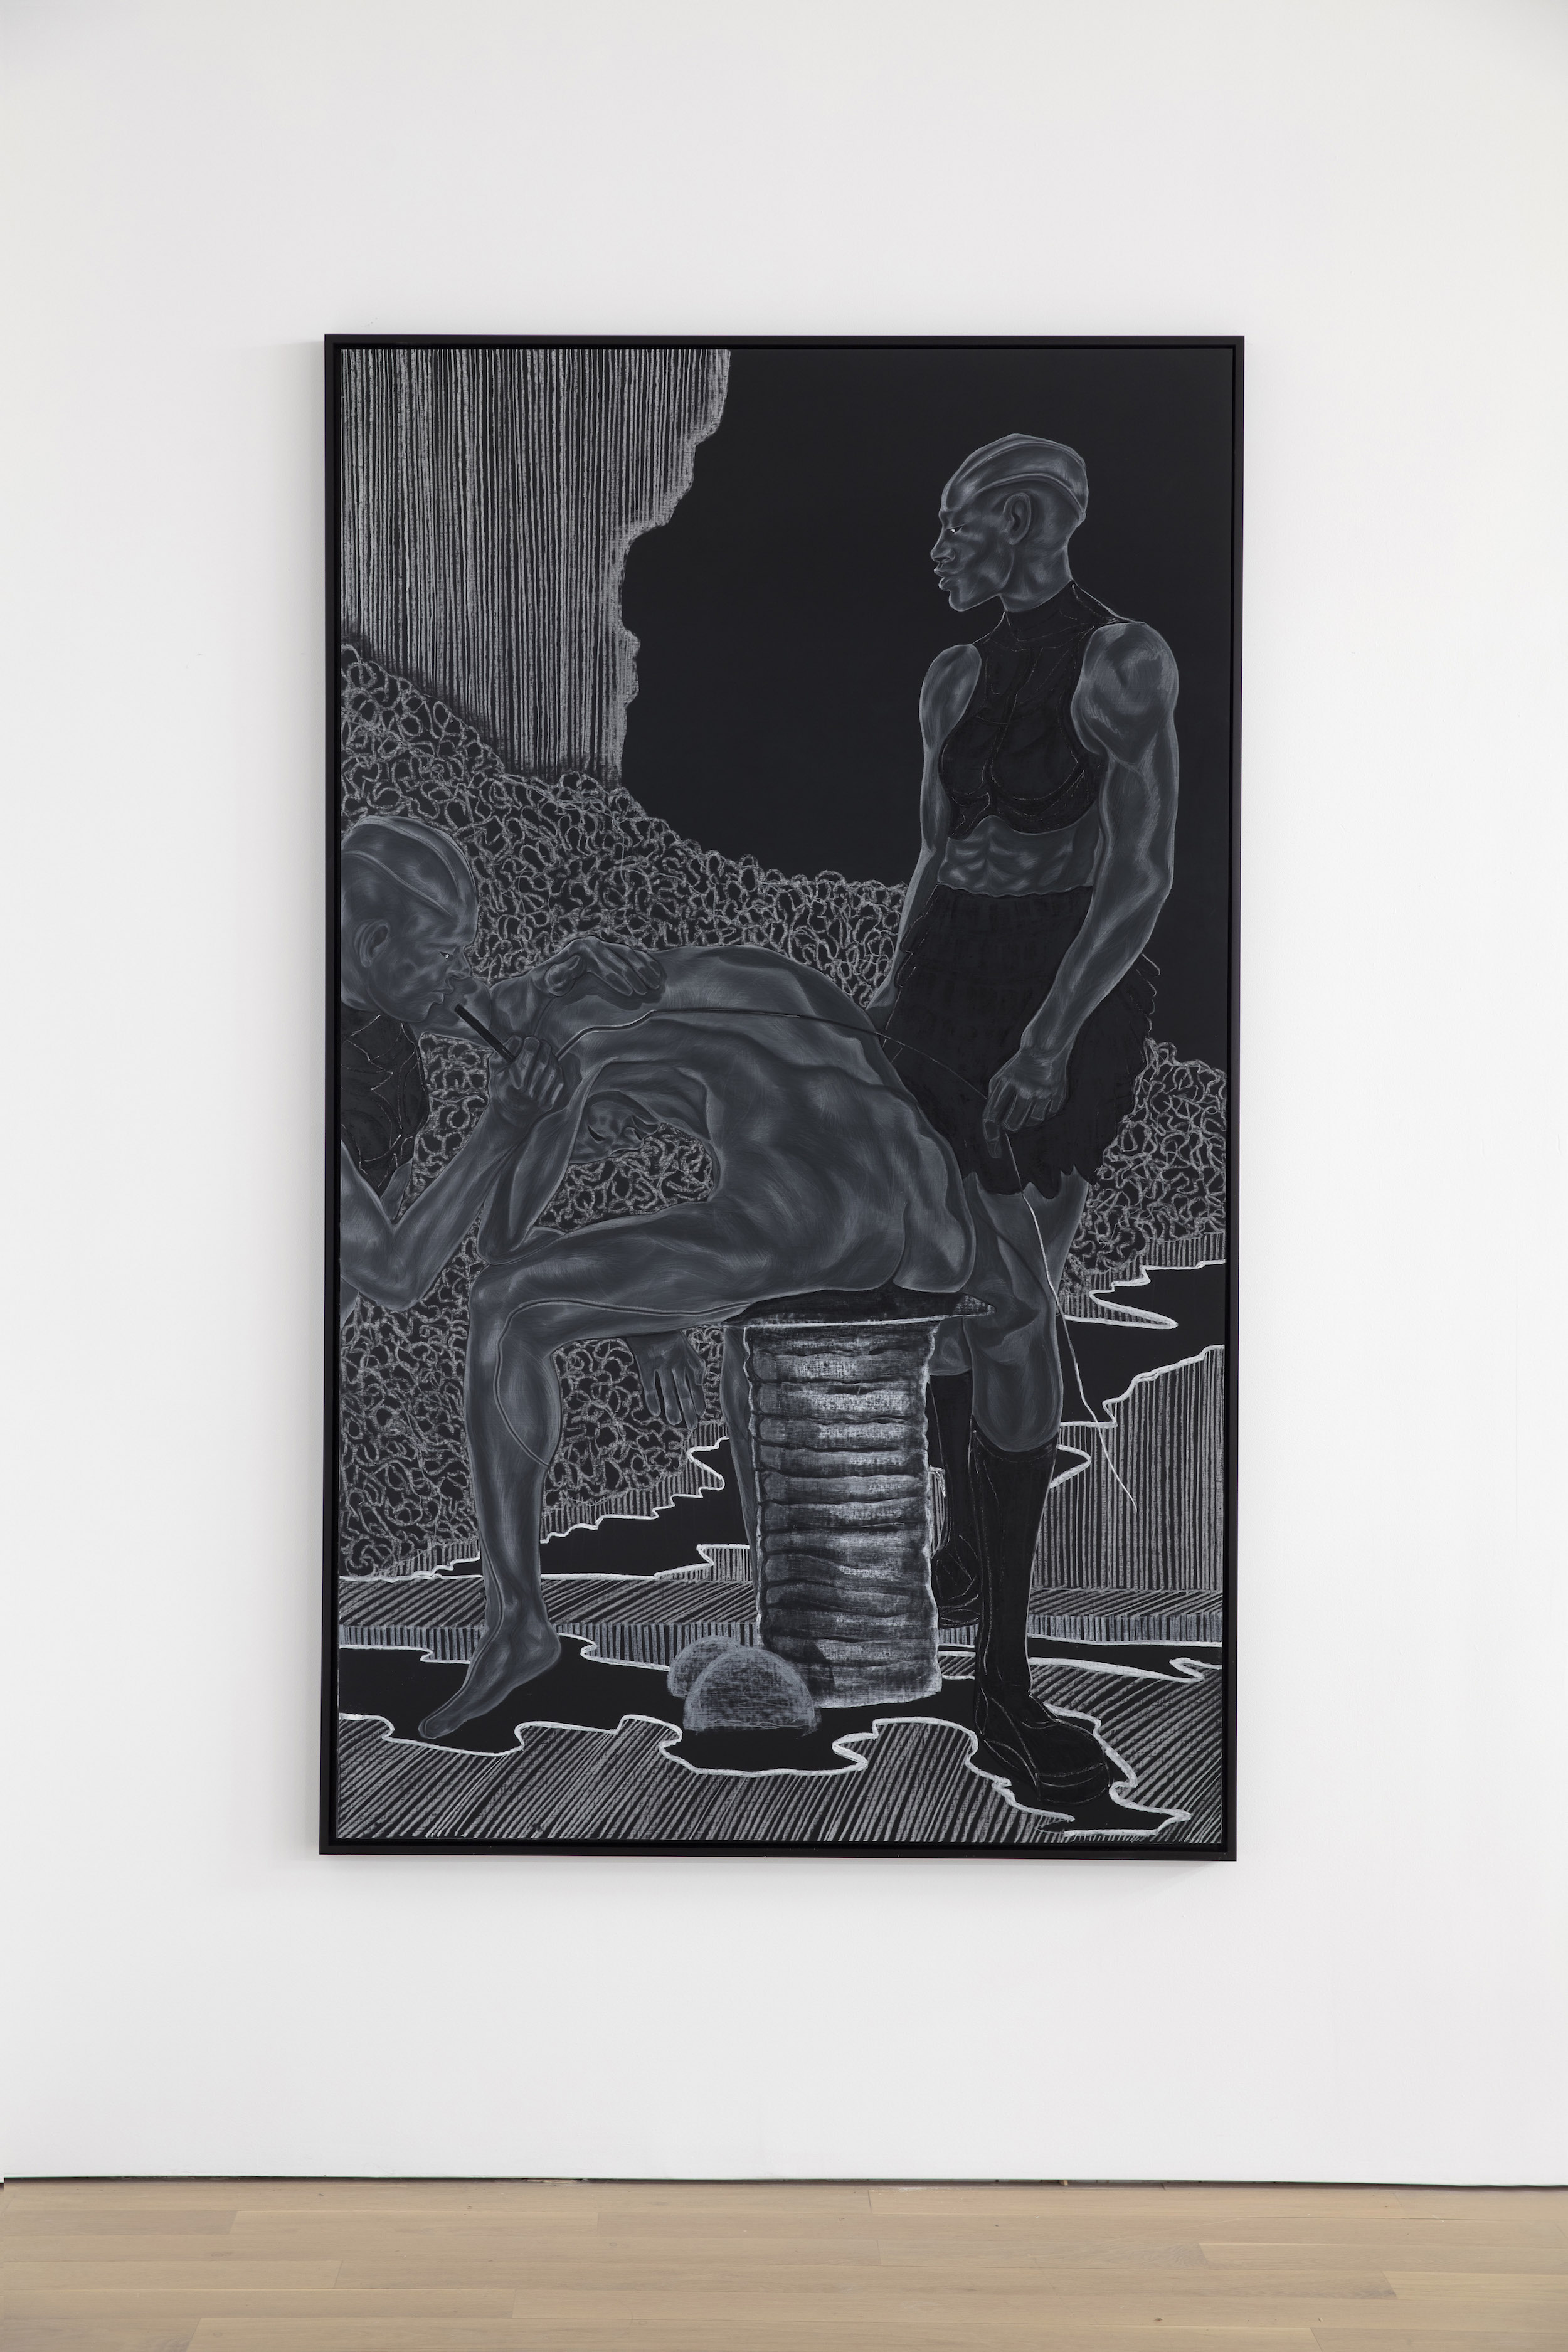 Toyin Ojih Odutola's A Countervailing Theory series 